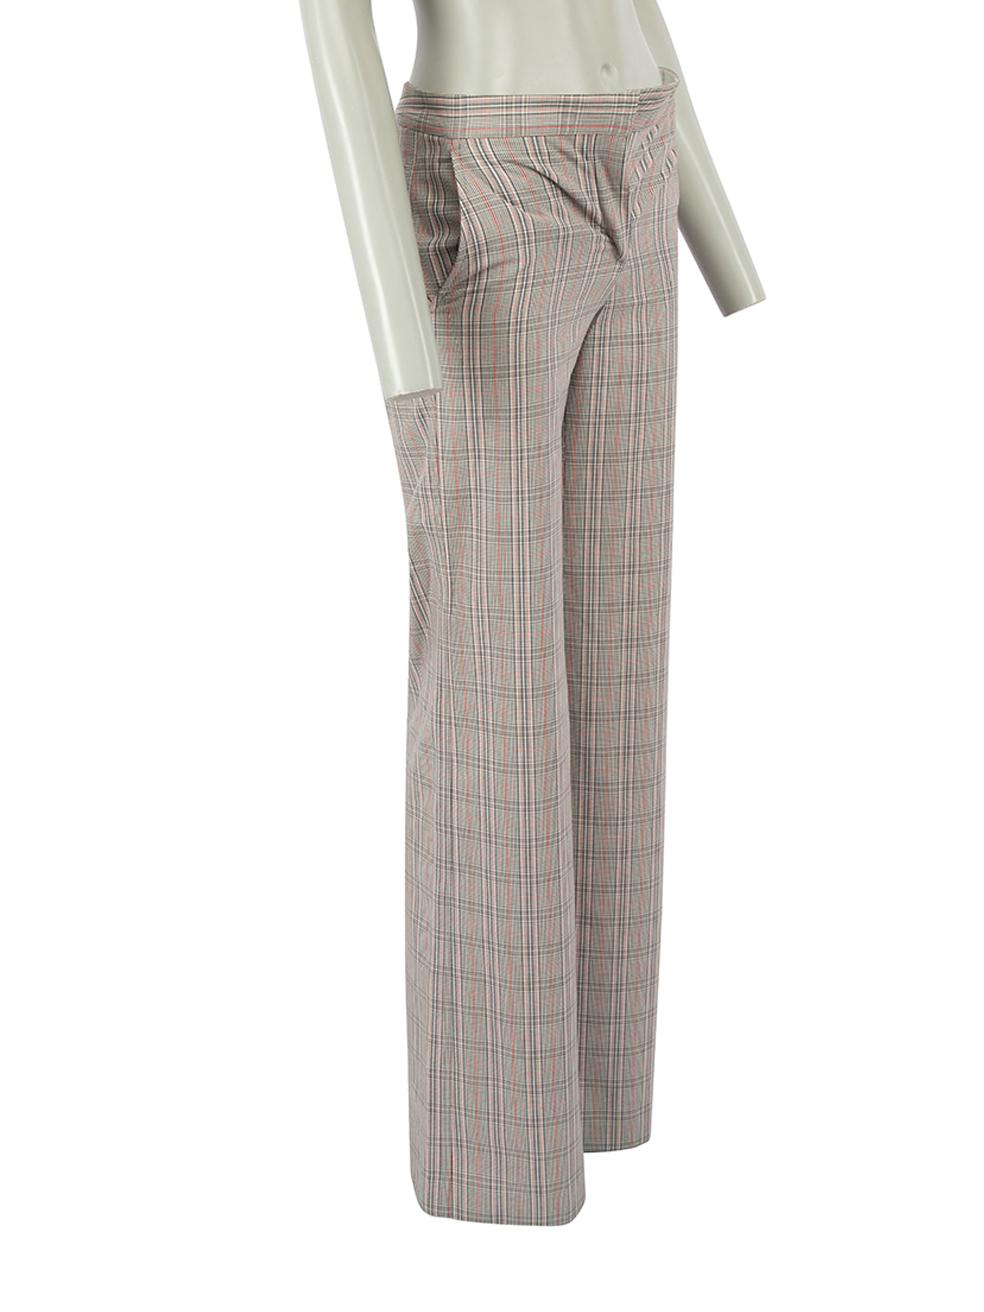 CONDITION is Very good. Minimal wear to trousers is evident. Minimal wear to the rear waistband lining with light discolouration on this used Off-Whitedesigner resale item.
 
 Details
 Grey
 Cotton
 Trousers
 Red and pink tartan pattern
 Wide leg
